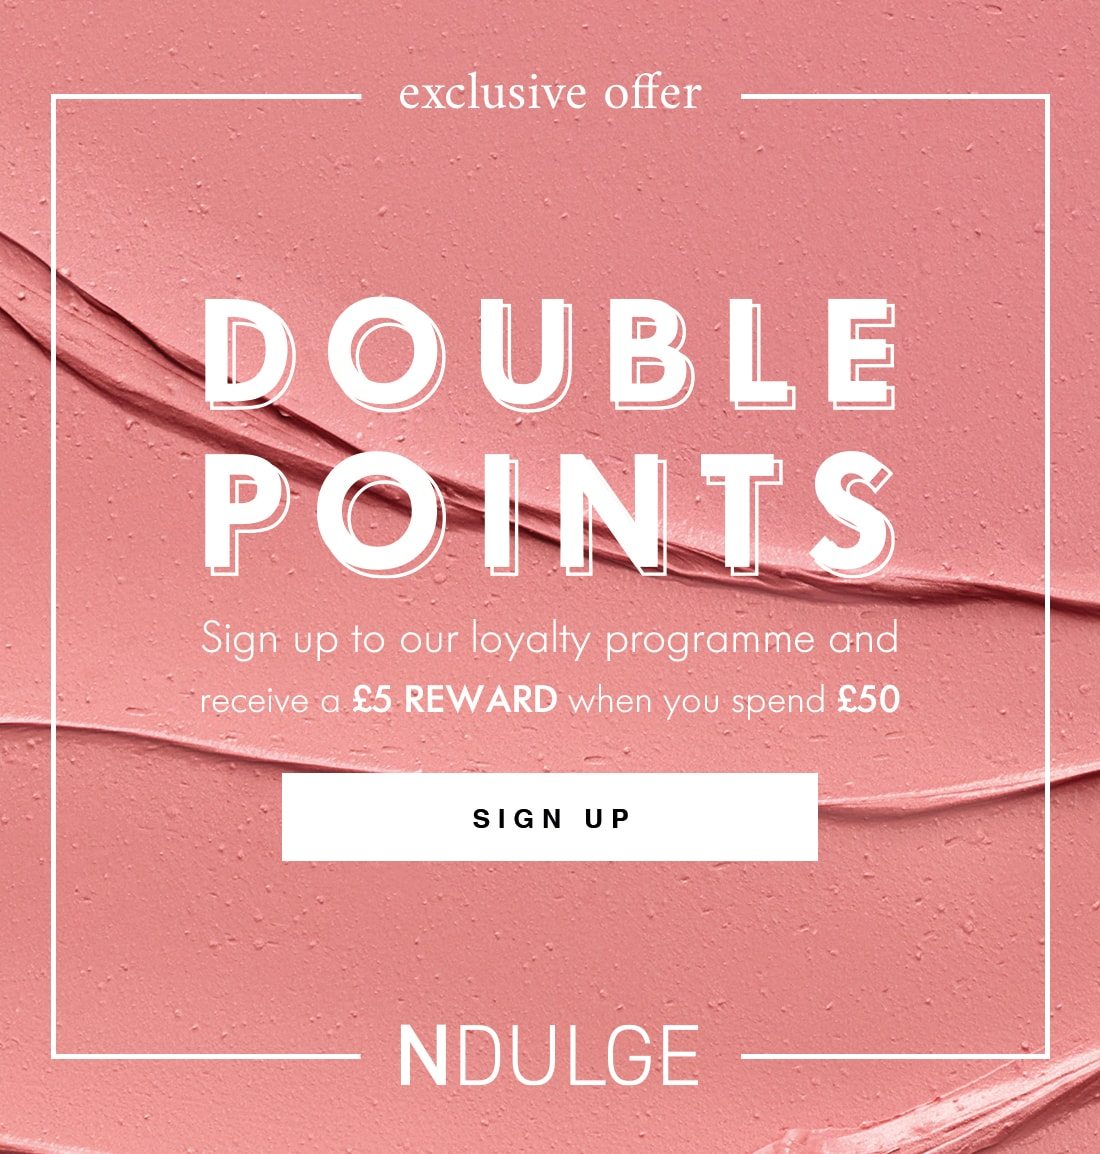 exclusive offer DOUBLE POINTS Sign up to our loyalty programme and receive a £5 REWARD when you spend £50 SIGN UP NDULGE